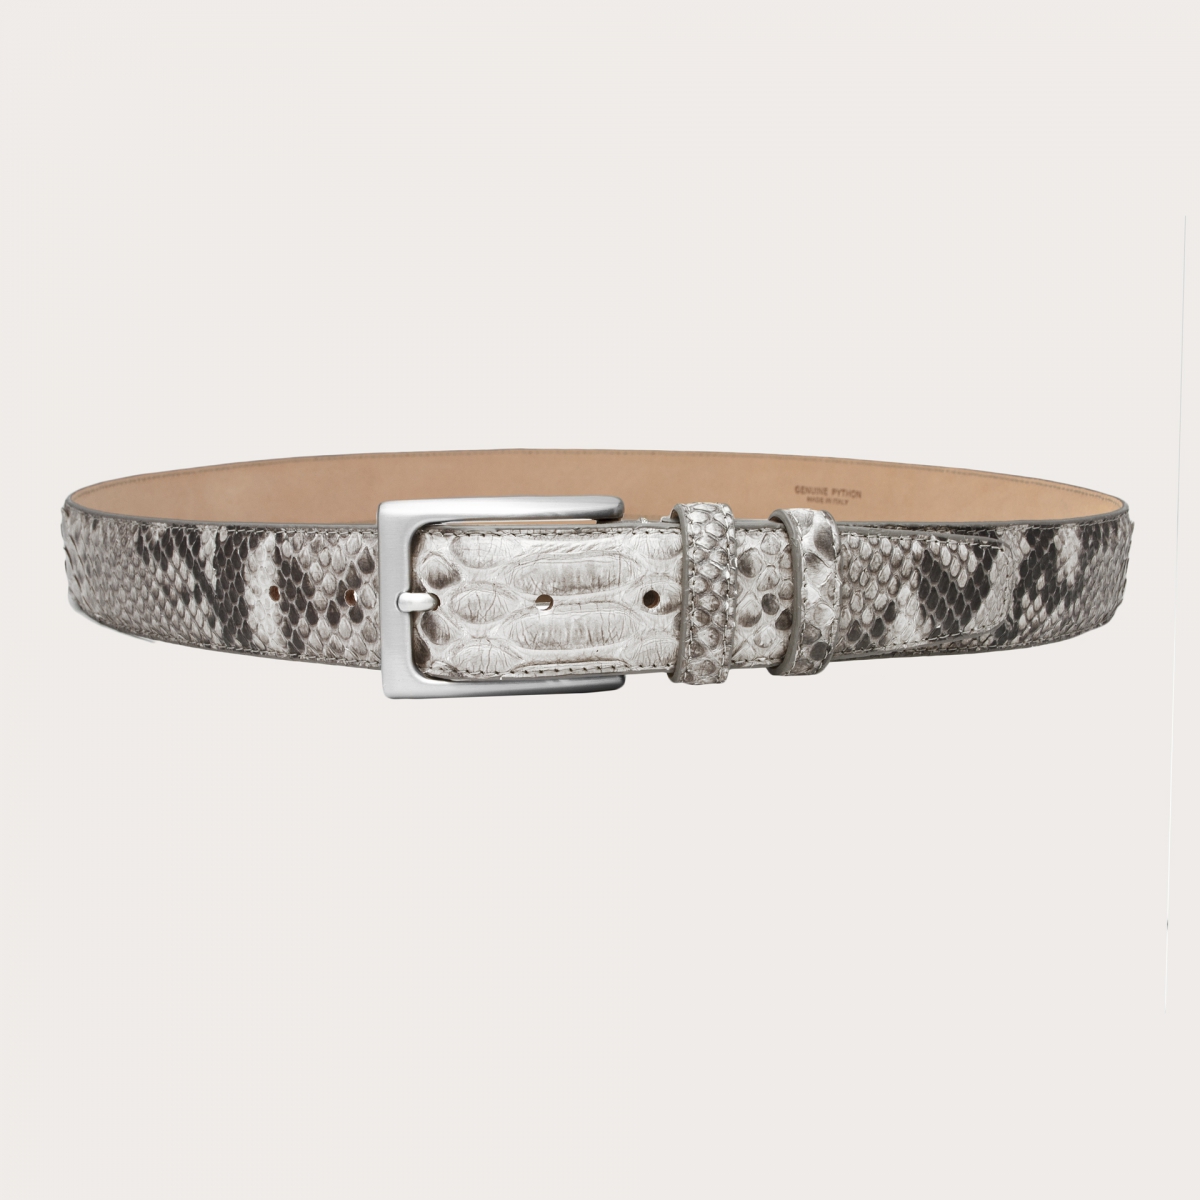 BRUCLE Rock-colored python leather belt